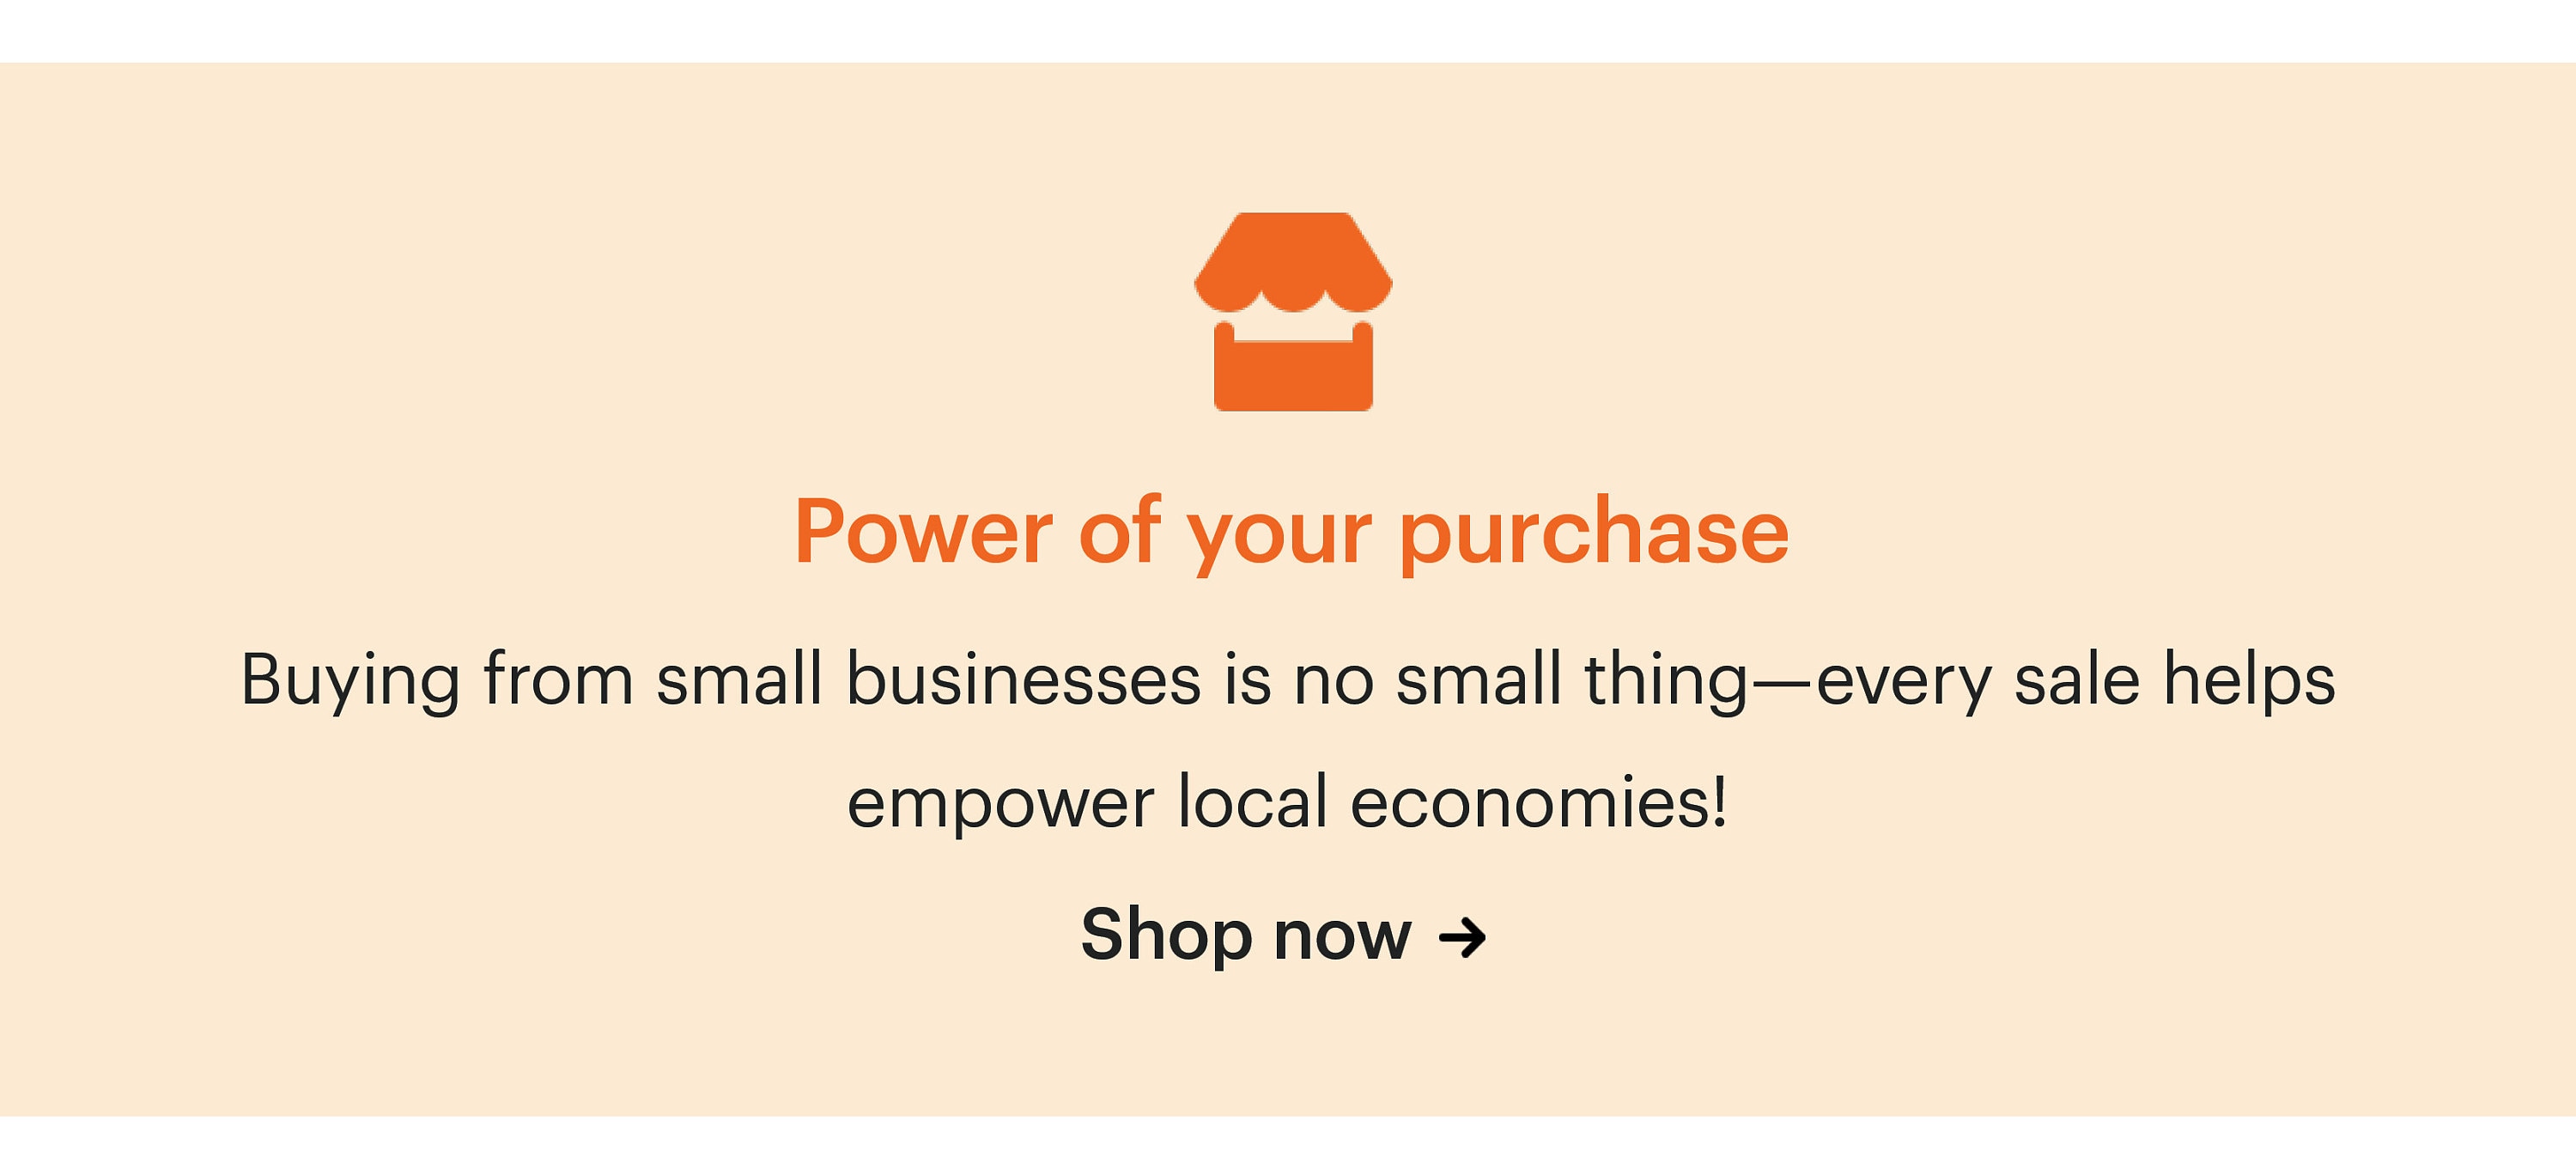 A banner encouraging buyers to shop from small businesses on Etsy.